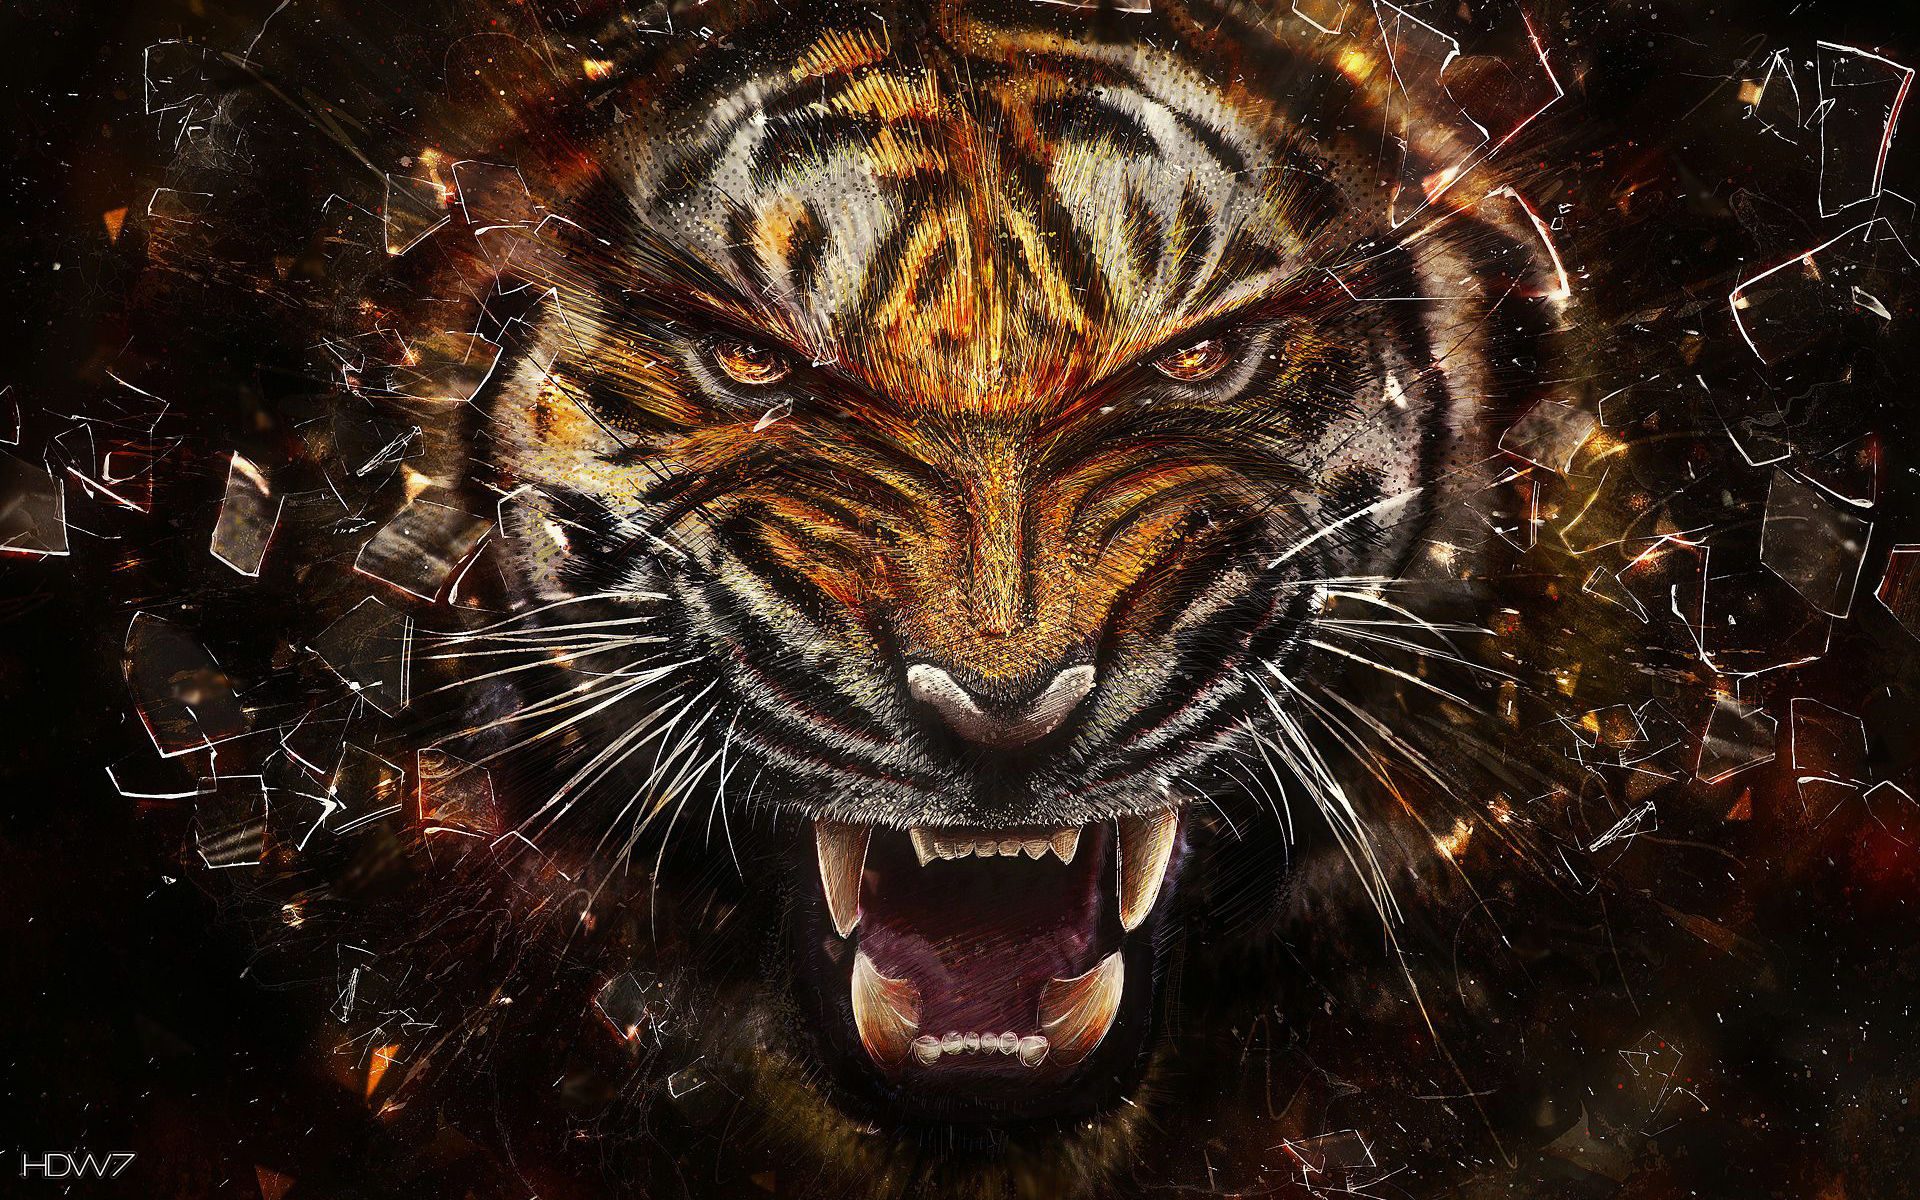 Wallpaper Name Angry Tiger Abstract Jpg Added October